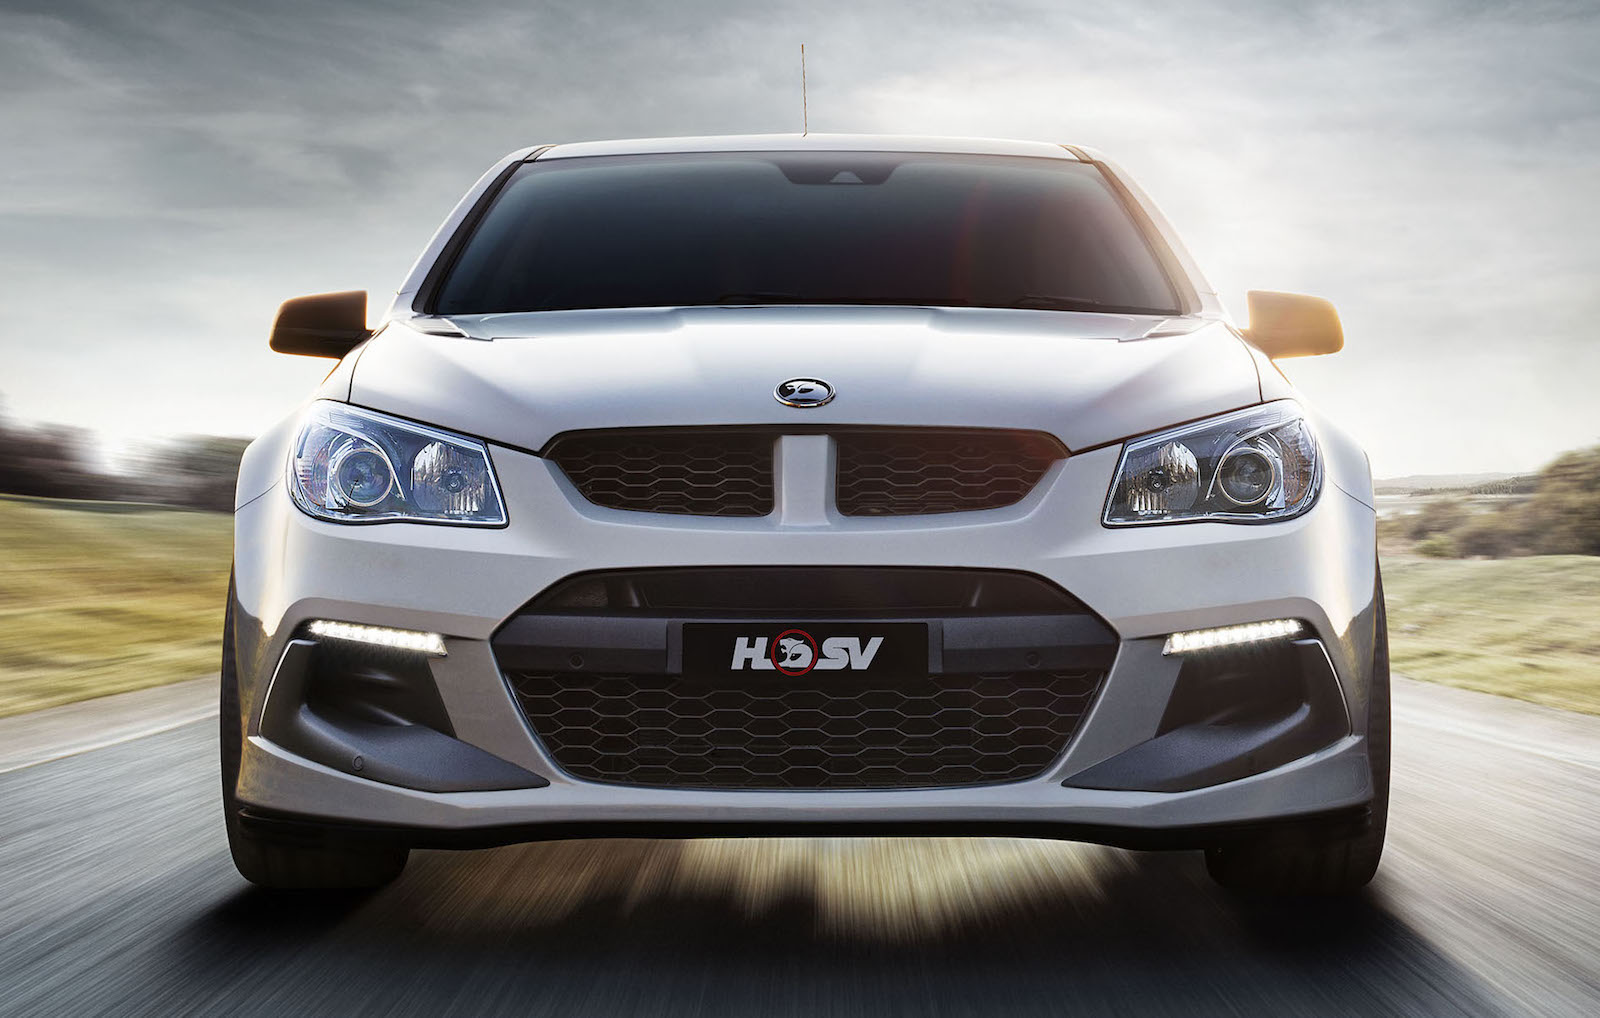 HSV’s future; where to go after local Commodore ends?